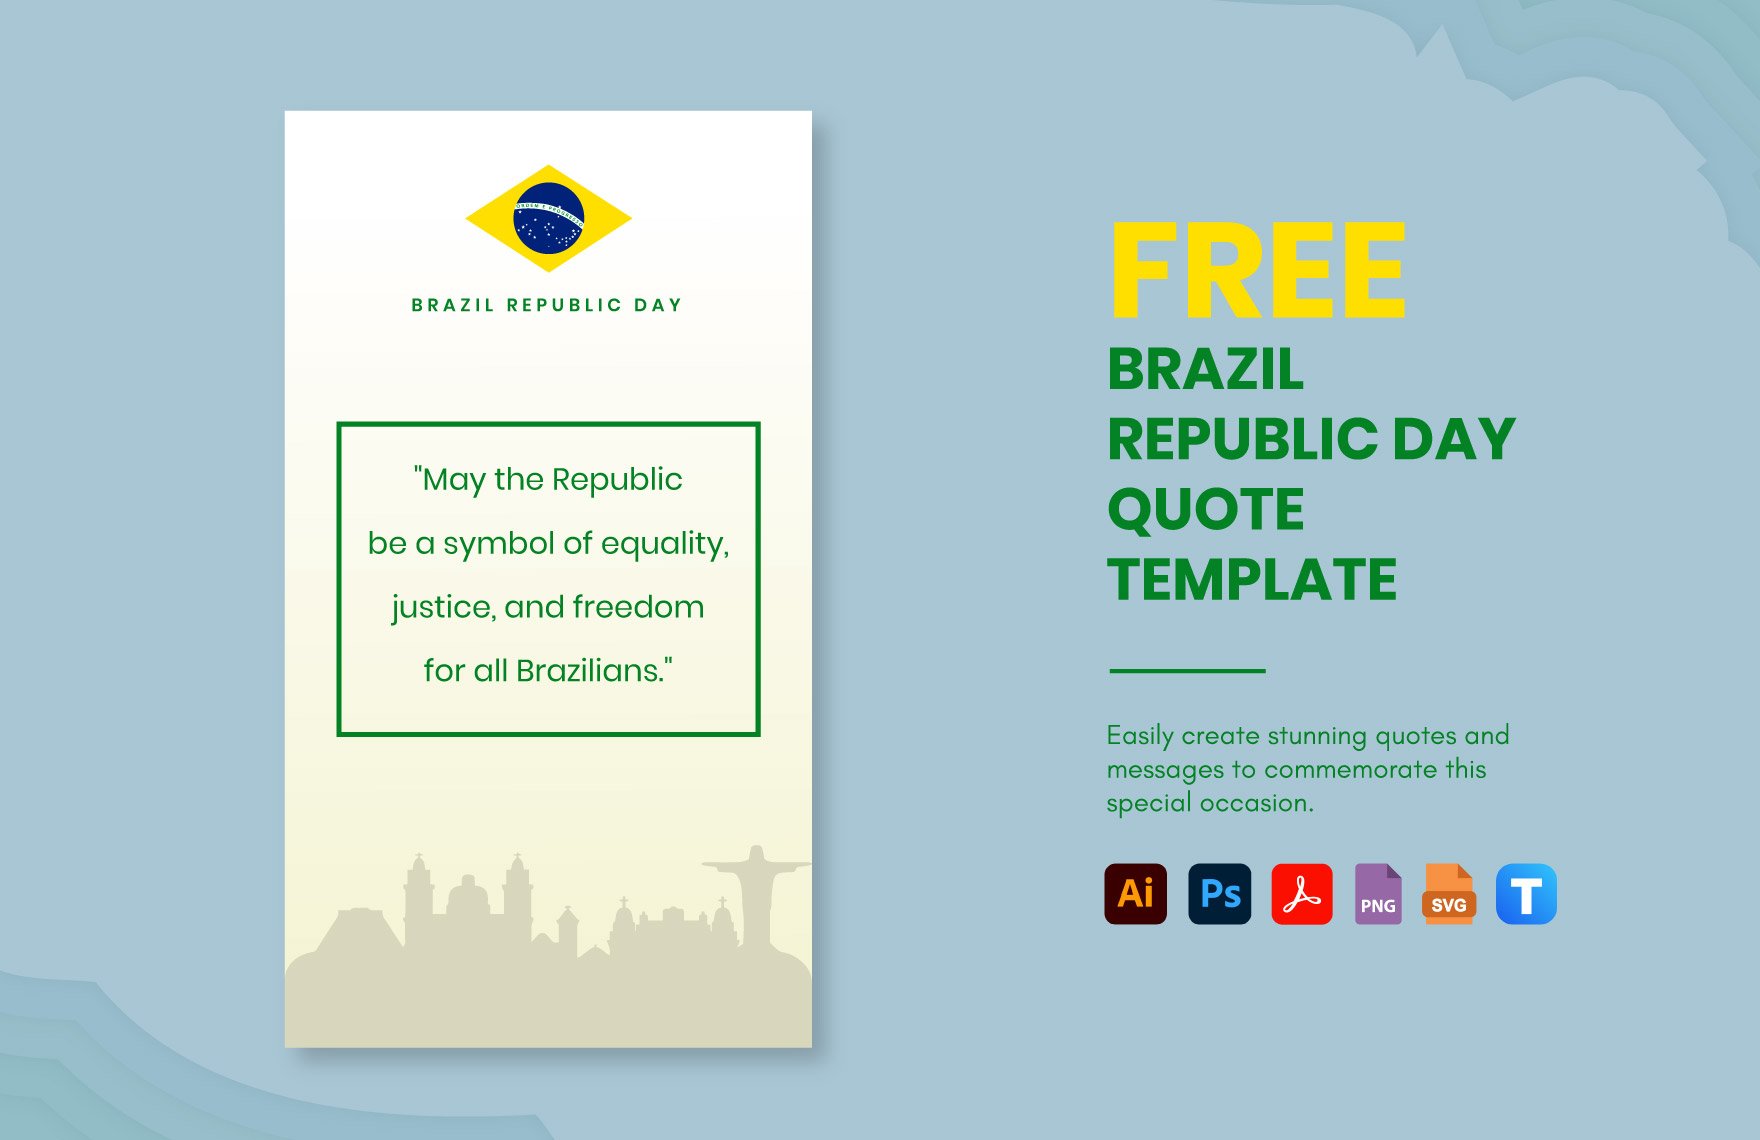 Free Brazil Republic Day Quote in PDF, Illustrator, PSD, SVG, PNG